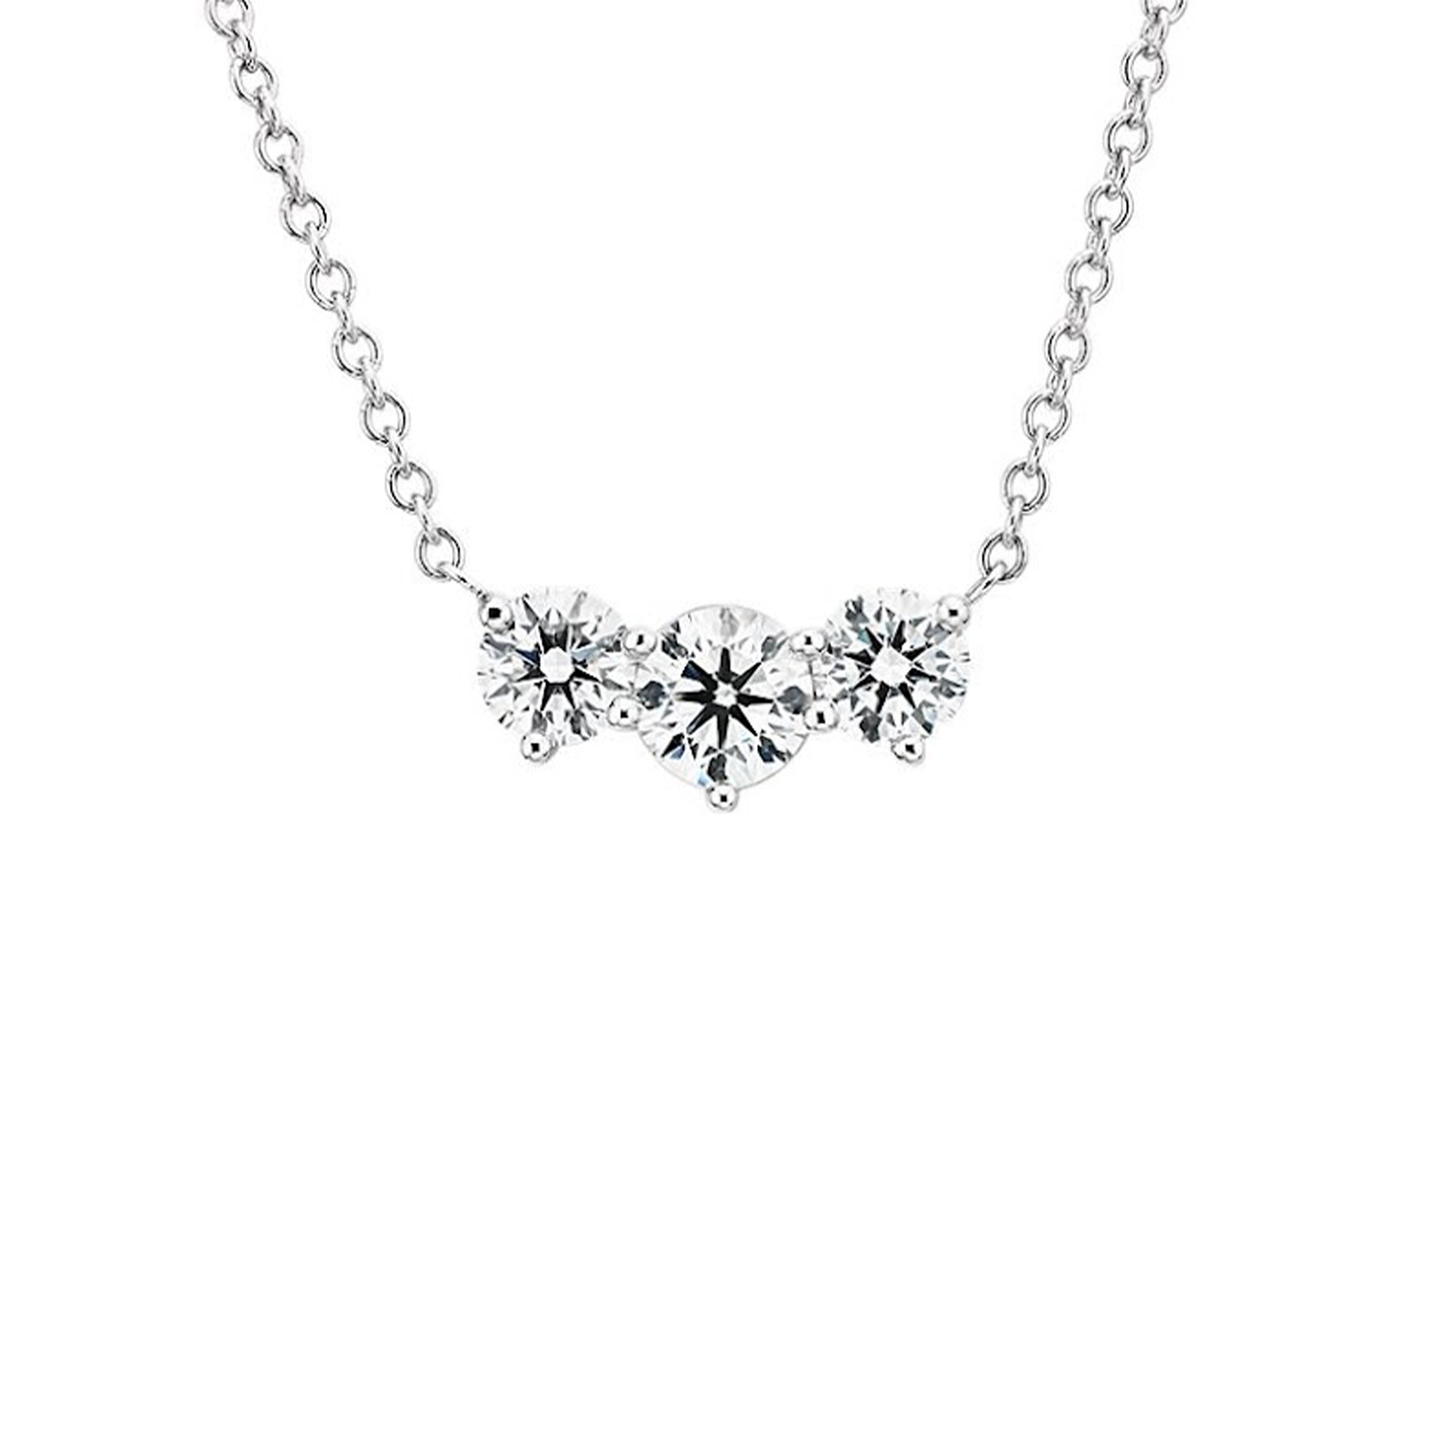 Jewellery - Necklaces & Pendants - Necklaces - Diamonelle Sterling Silver 3  Stone Diamonelle Necklace - Online Shopping for Canadians